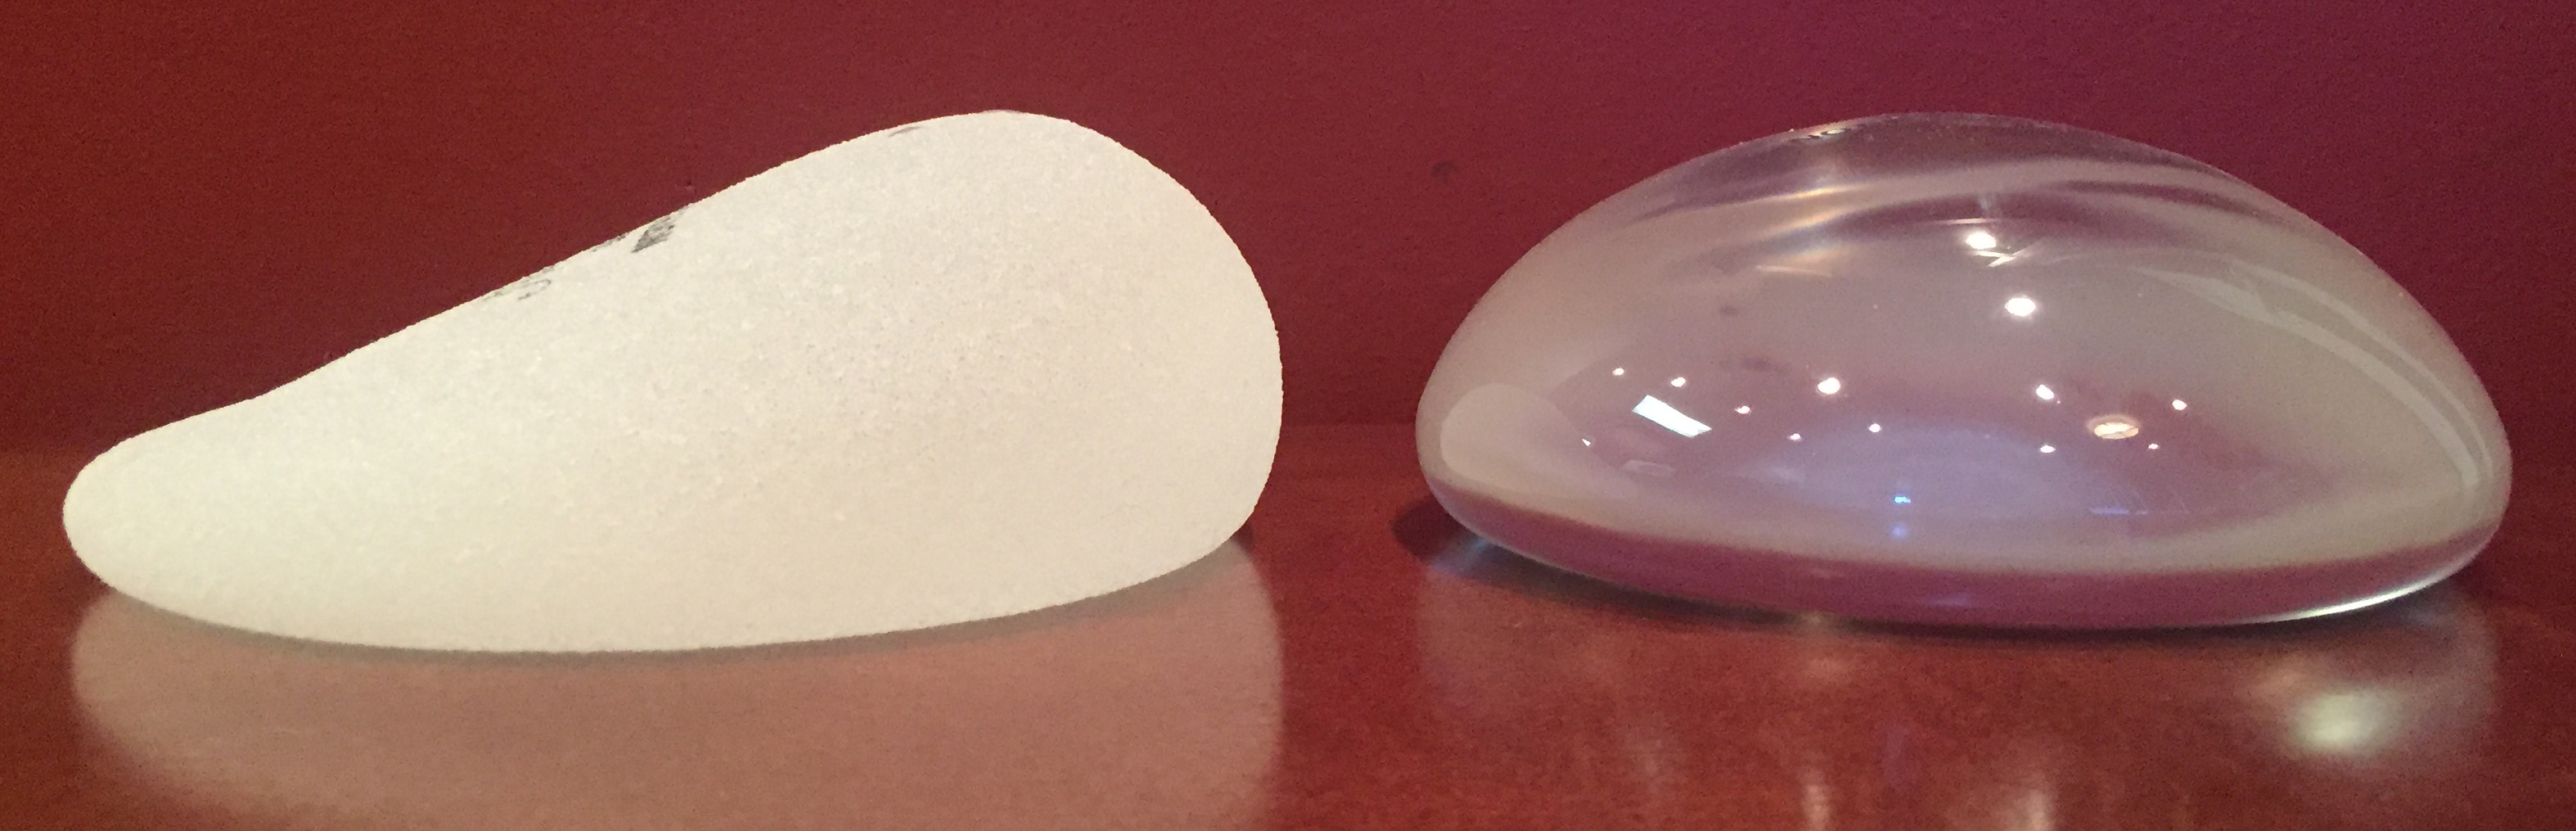 Shaped vs. Round Breast Implants